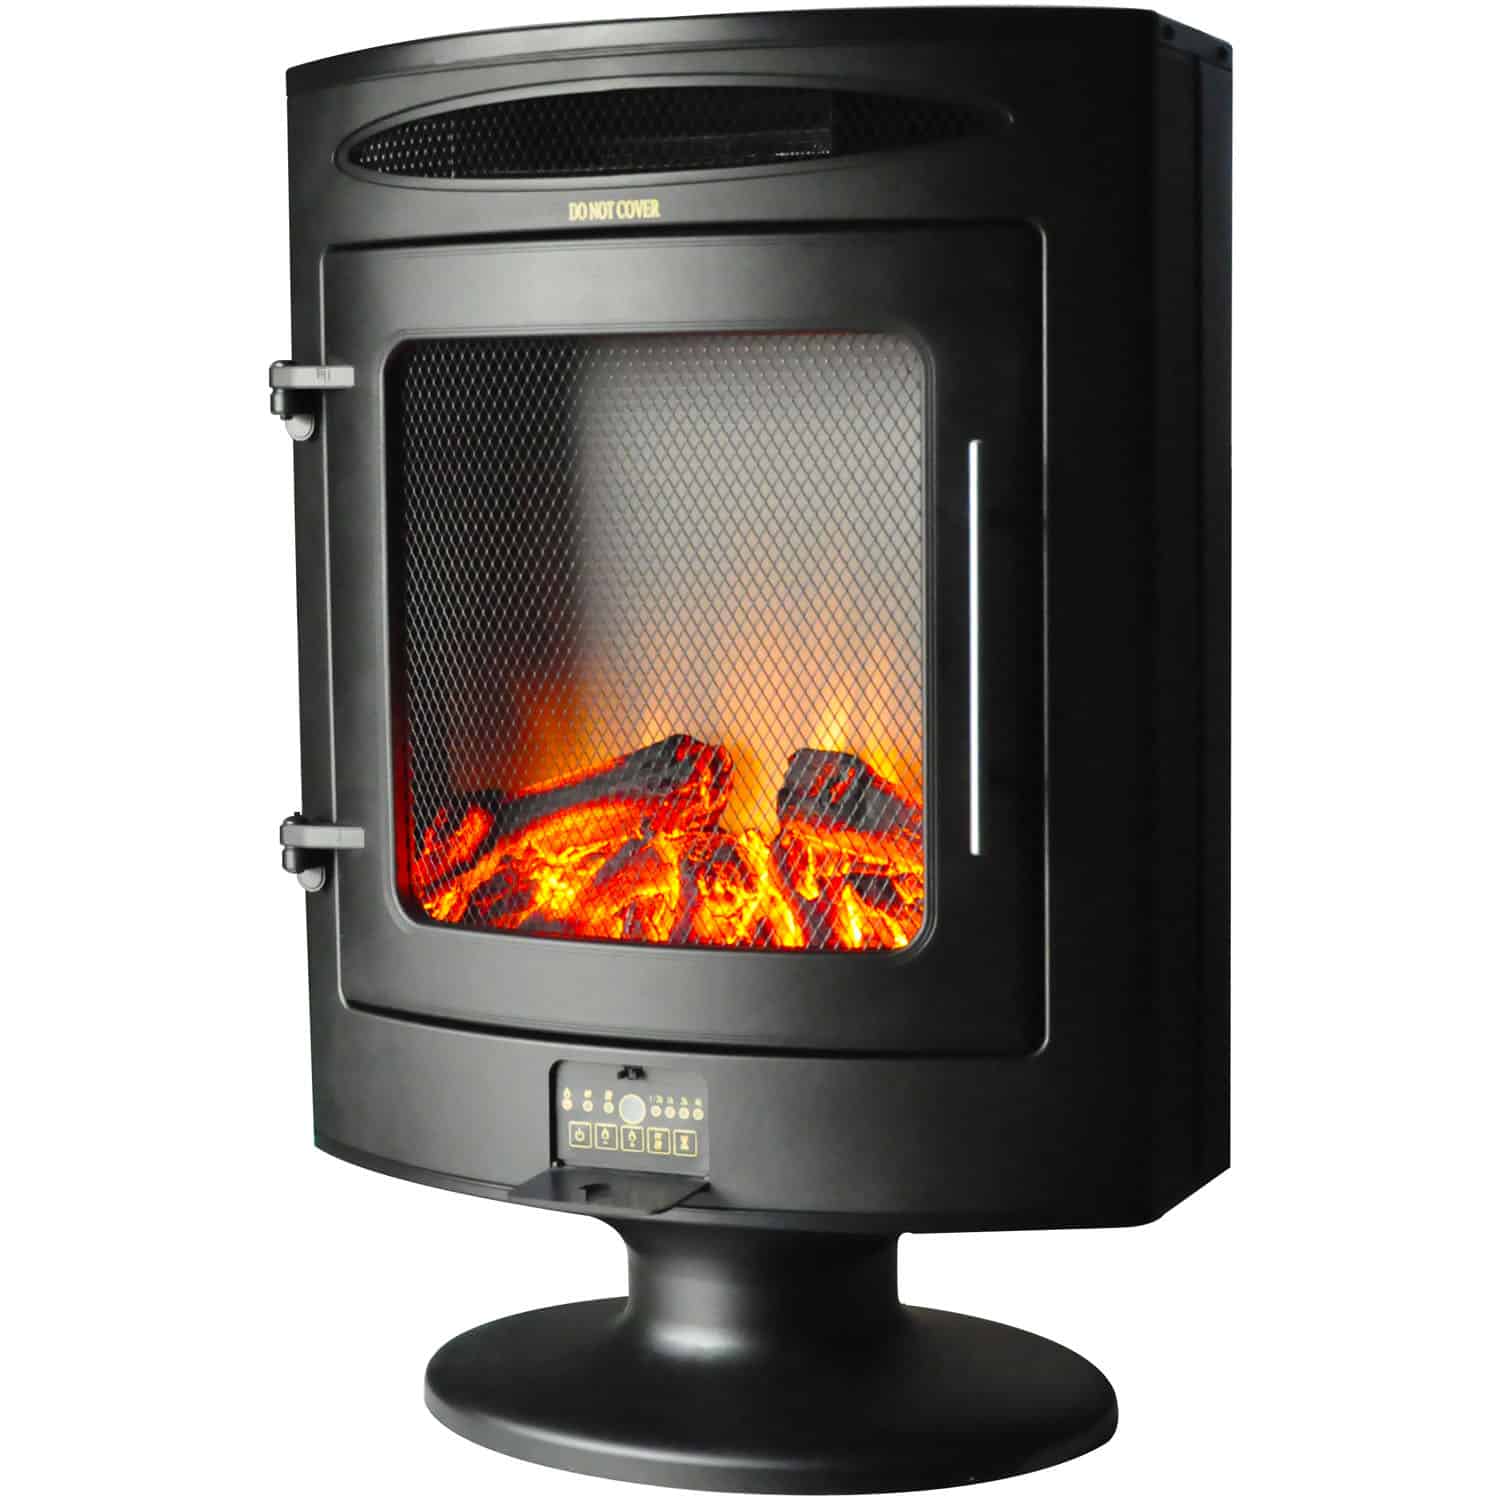 Cambridge 1500W Freestanding Electric Fireplace Heater In Black With Log Display 1 